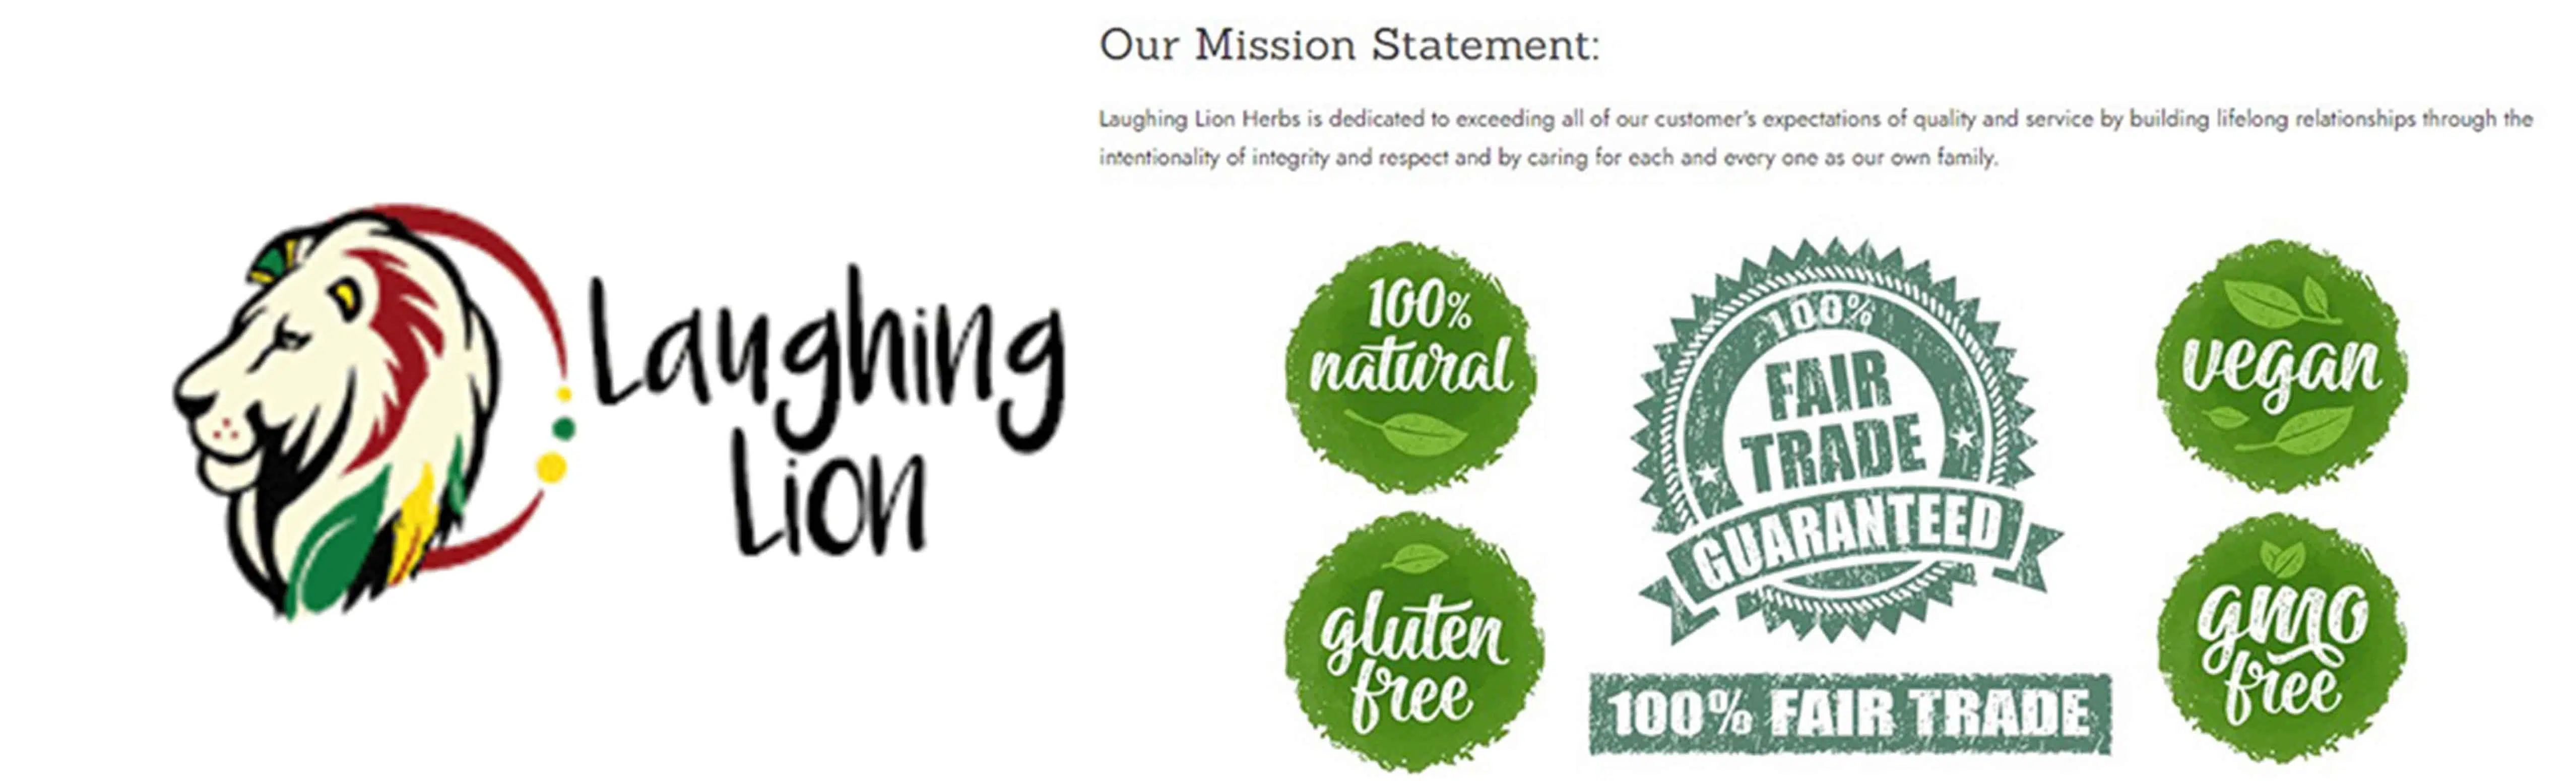 Laughing lion herbs mission statement